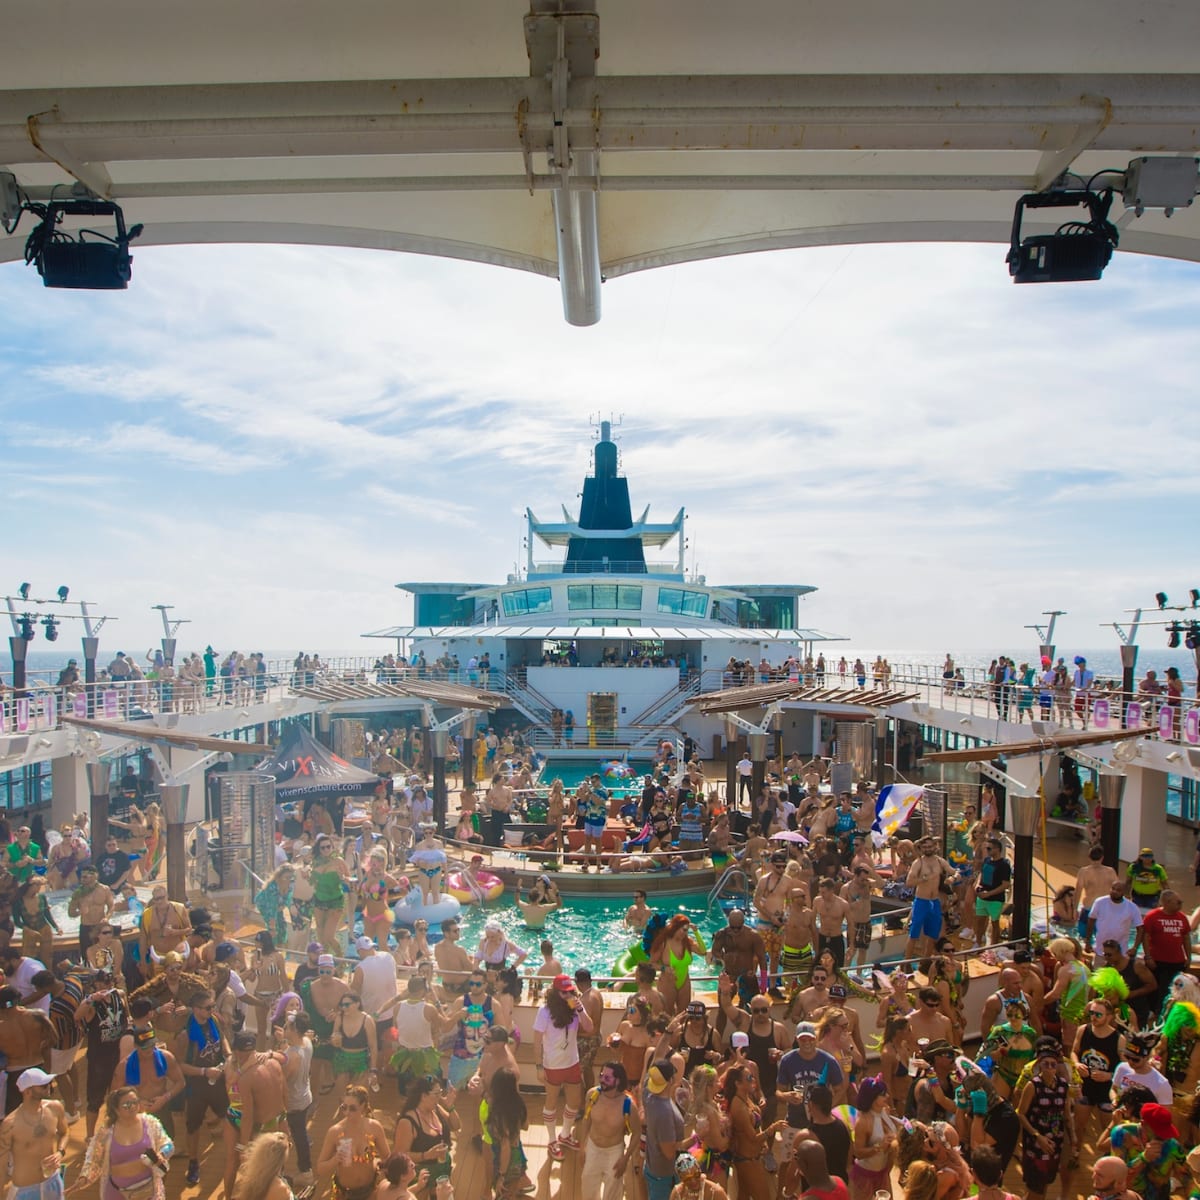 Groove Cruise (@groovecruise) • Instagram photos and videos